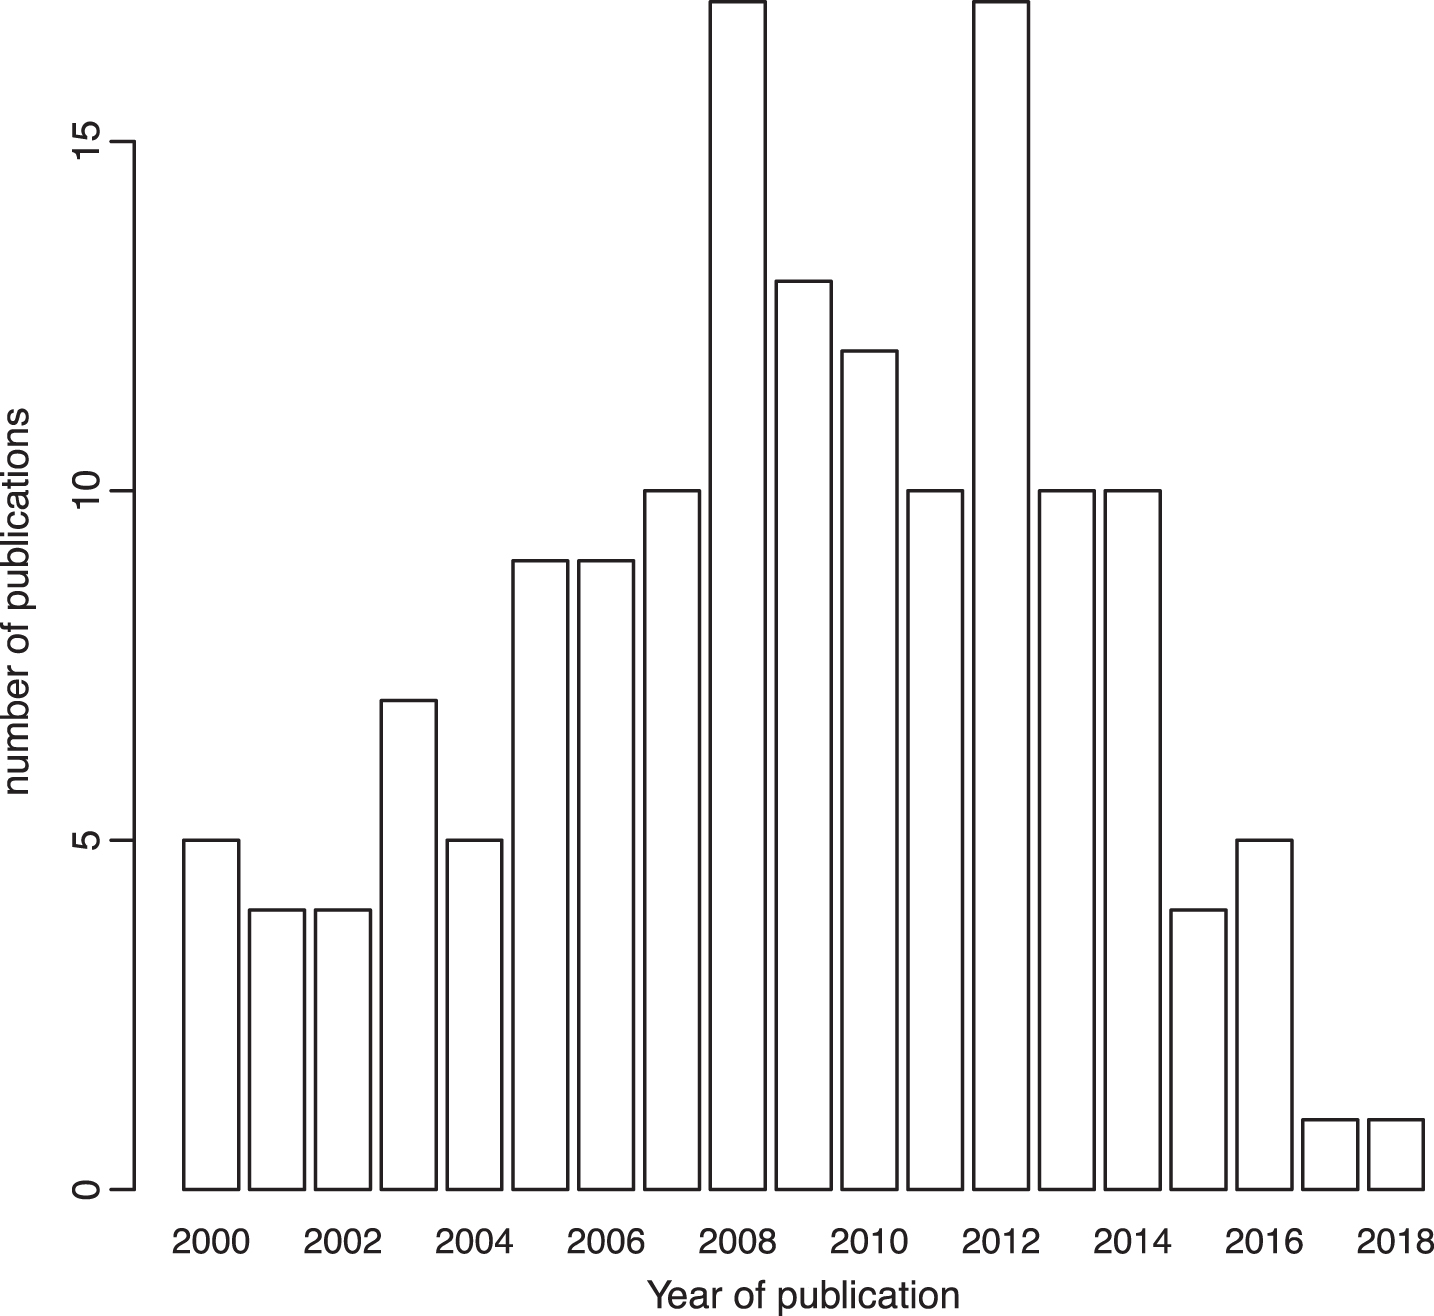 Number of published papers considered in the systematic review according to their year of publication.